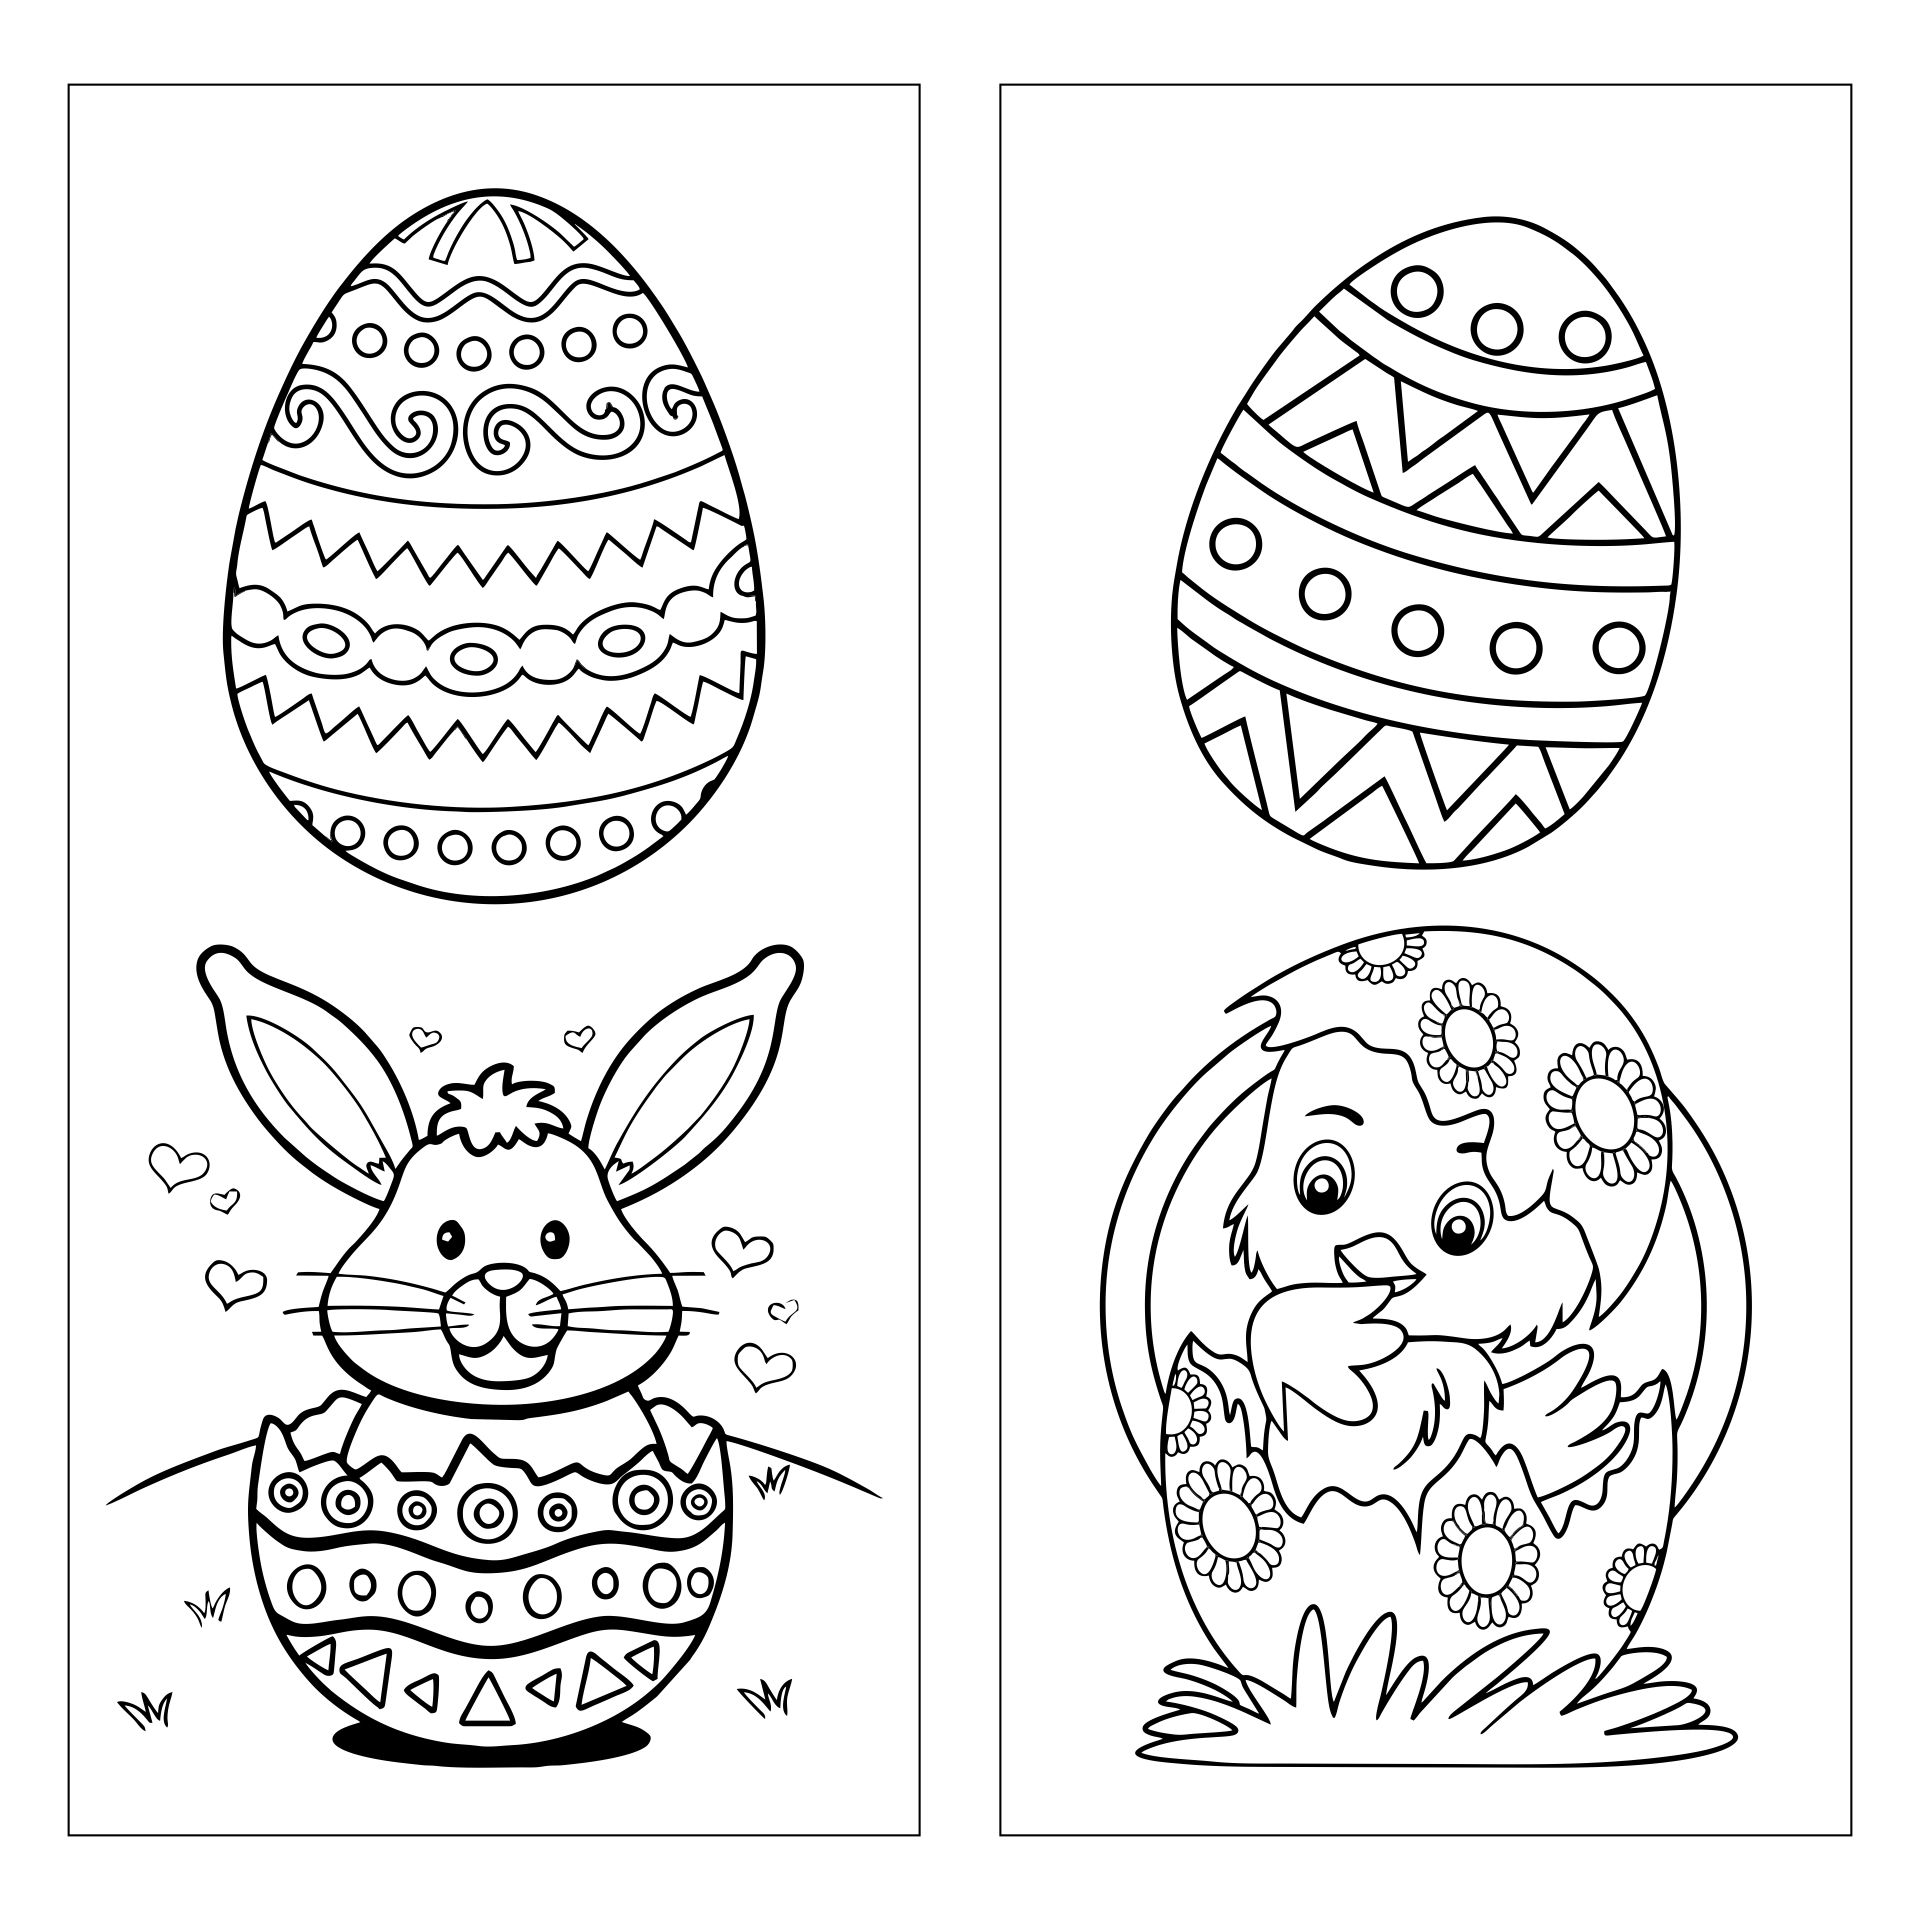 Printable Easter Bookmarks to Color